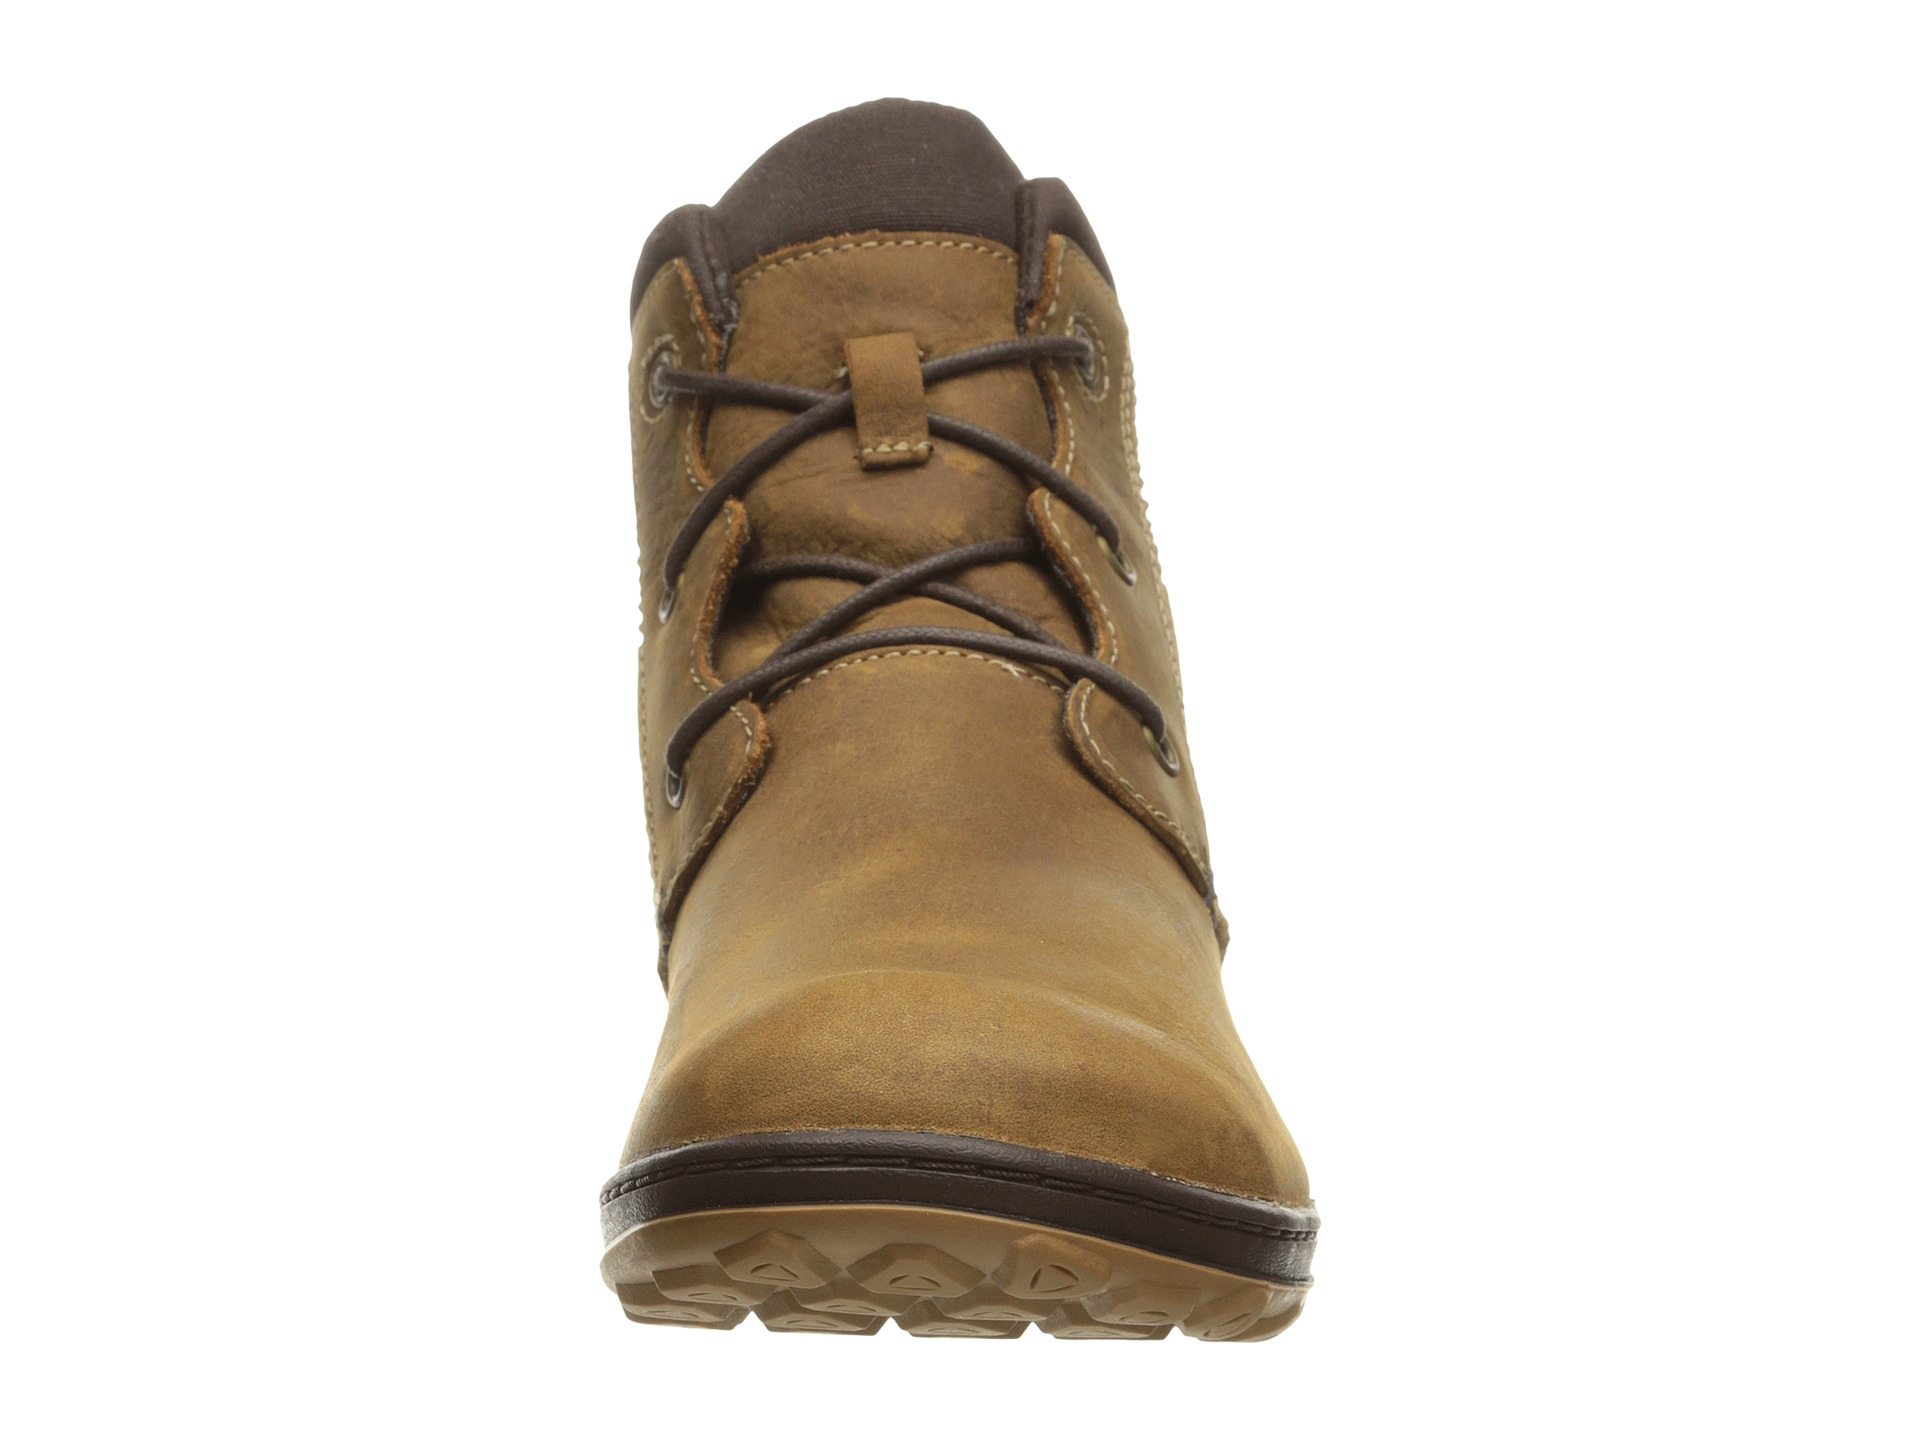 Merrell Leather Ashland Vee Ankle in Brown - Lyst